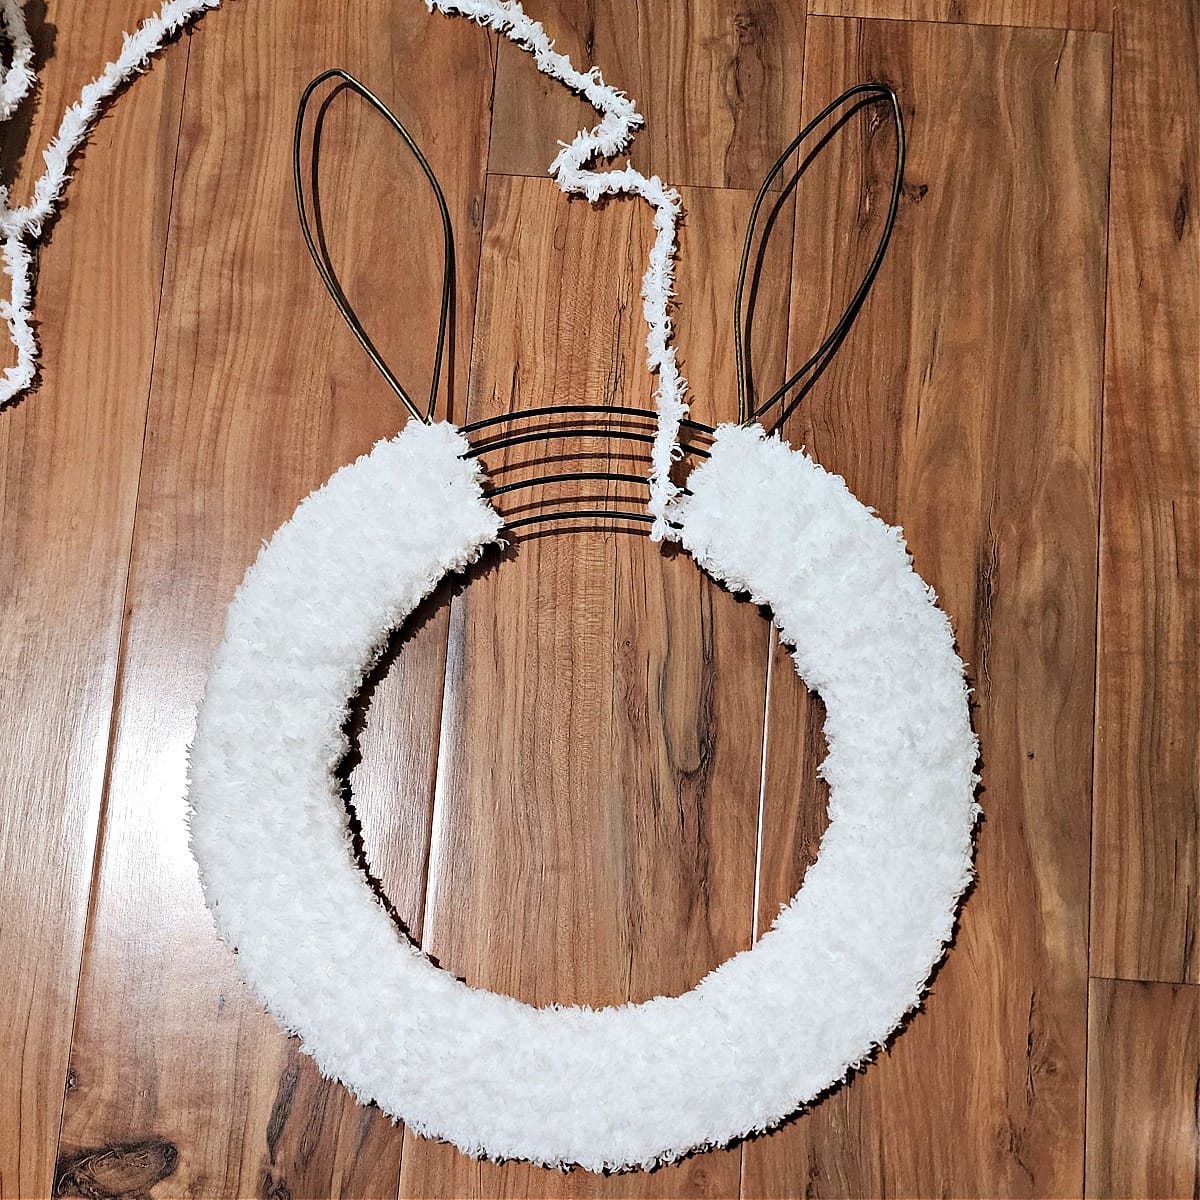 Bunny wreath being wrapped with bulky and fuzzy yarn.